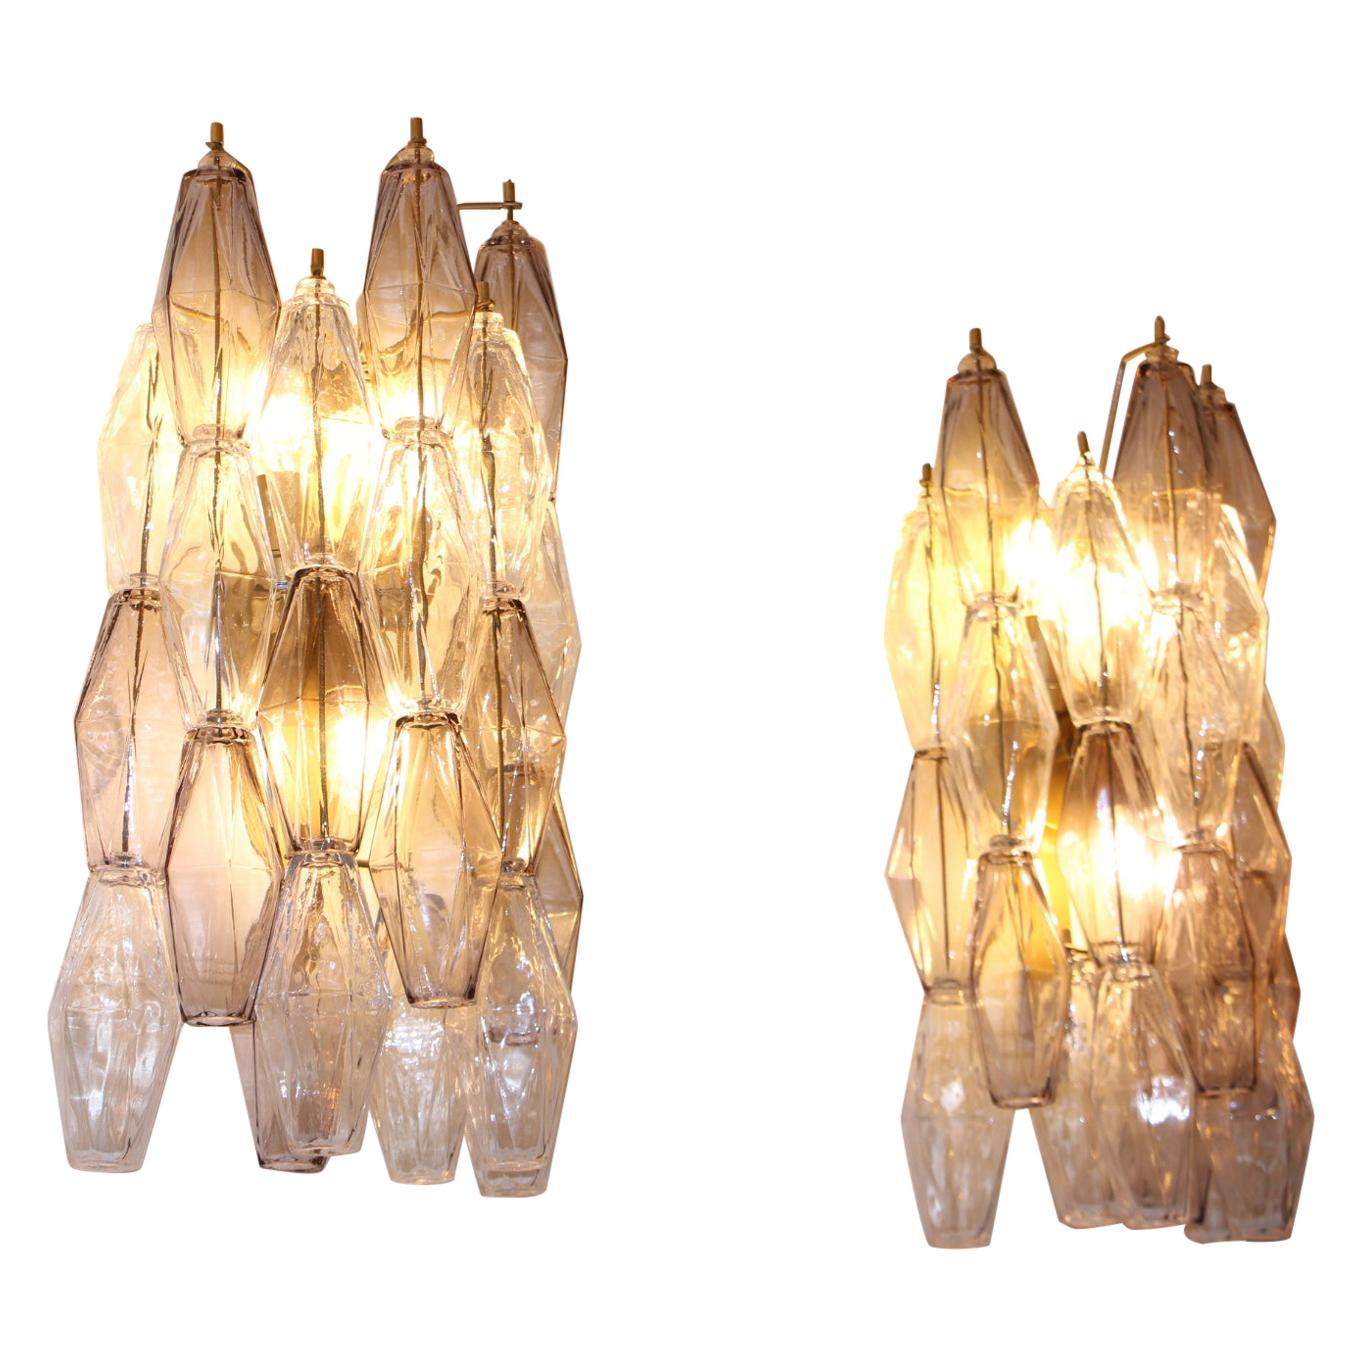 Pair of Polyhedral Sconces in Murano Glass, Venini Style